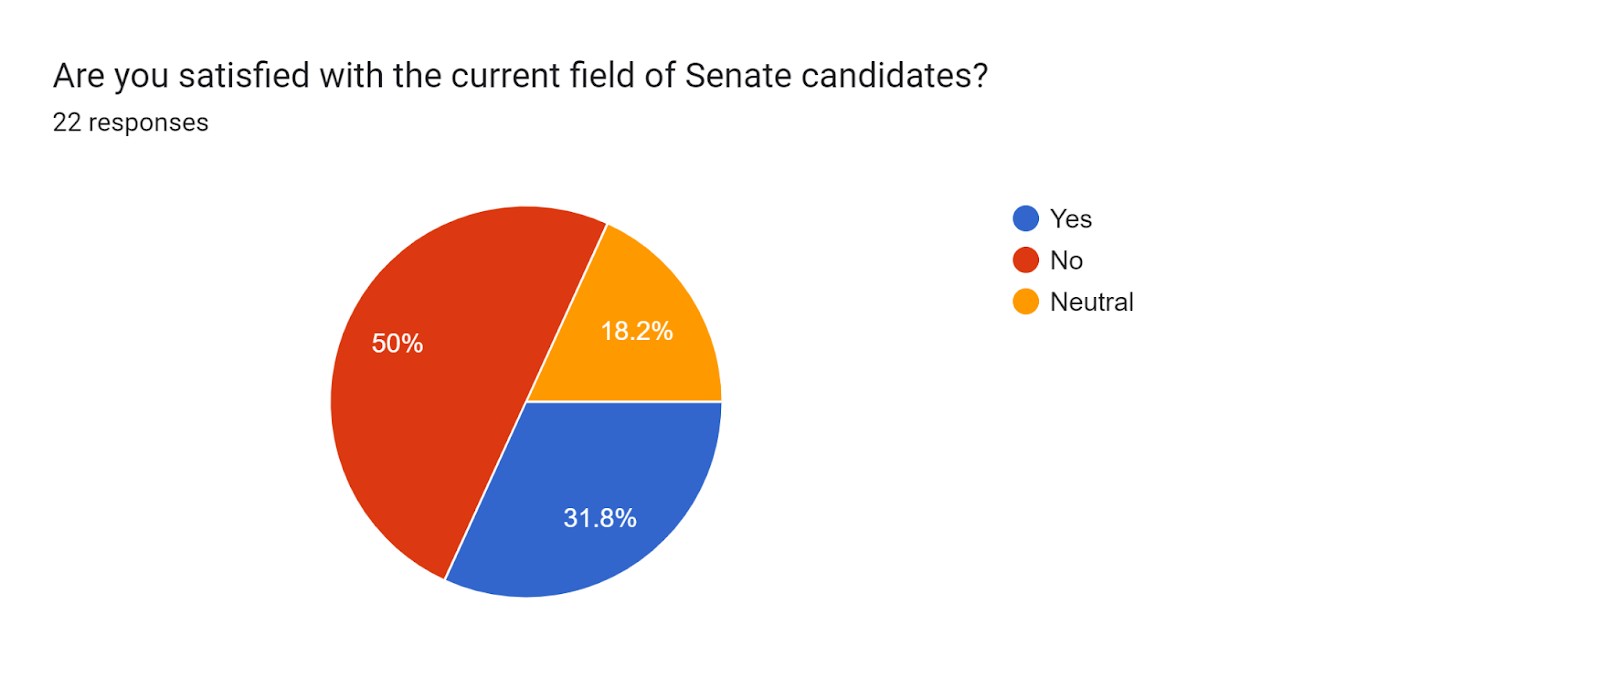 Forms response chart. Question title: Are you satisfied with the current field of Senate candidates?. Number of responses: 22 responses.